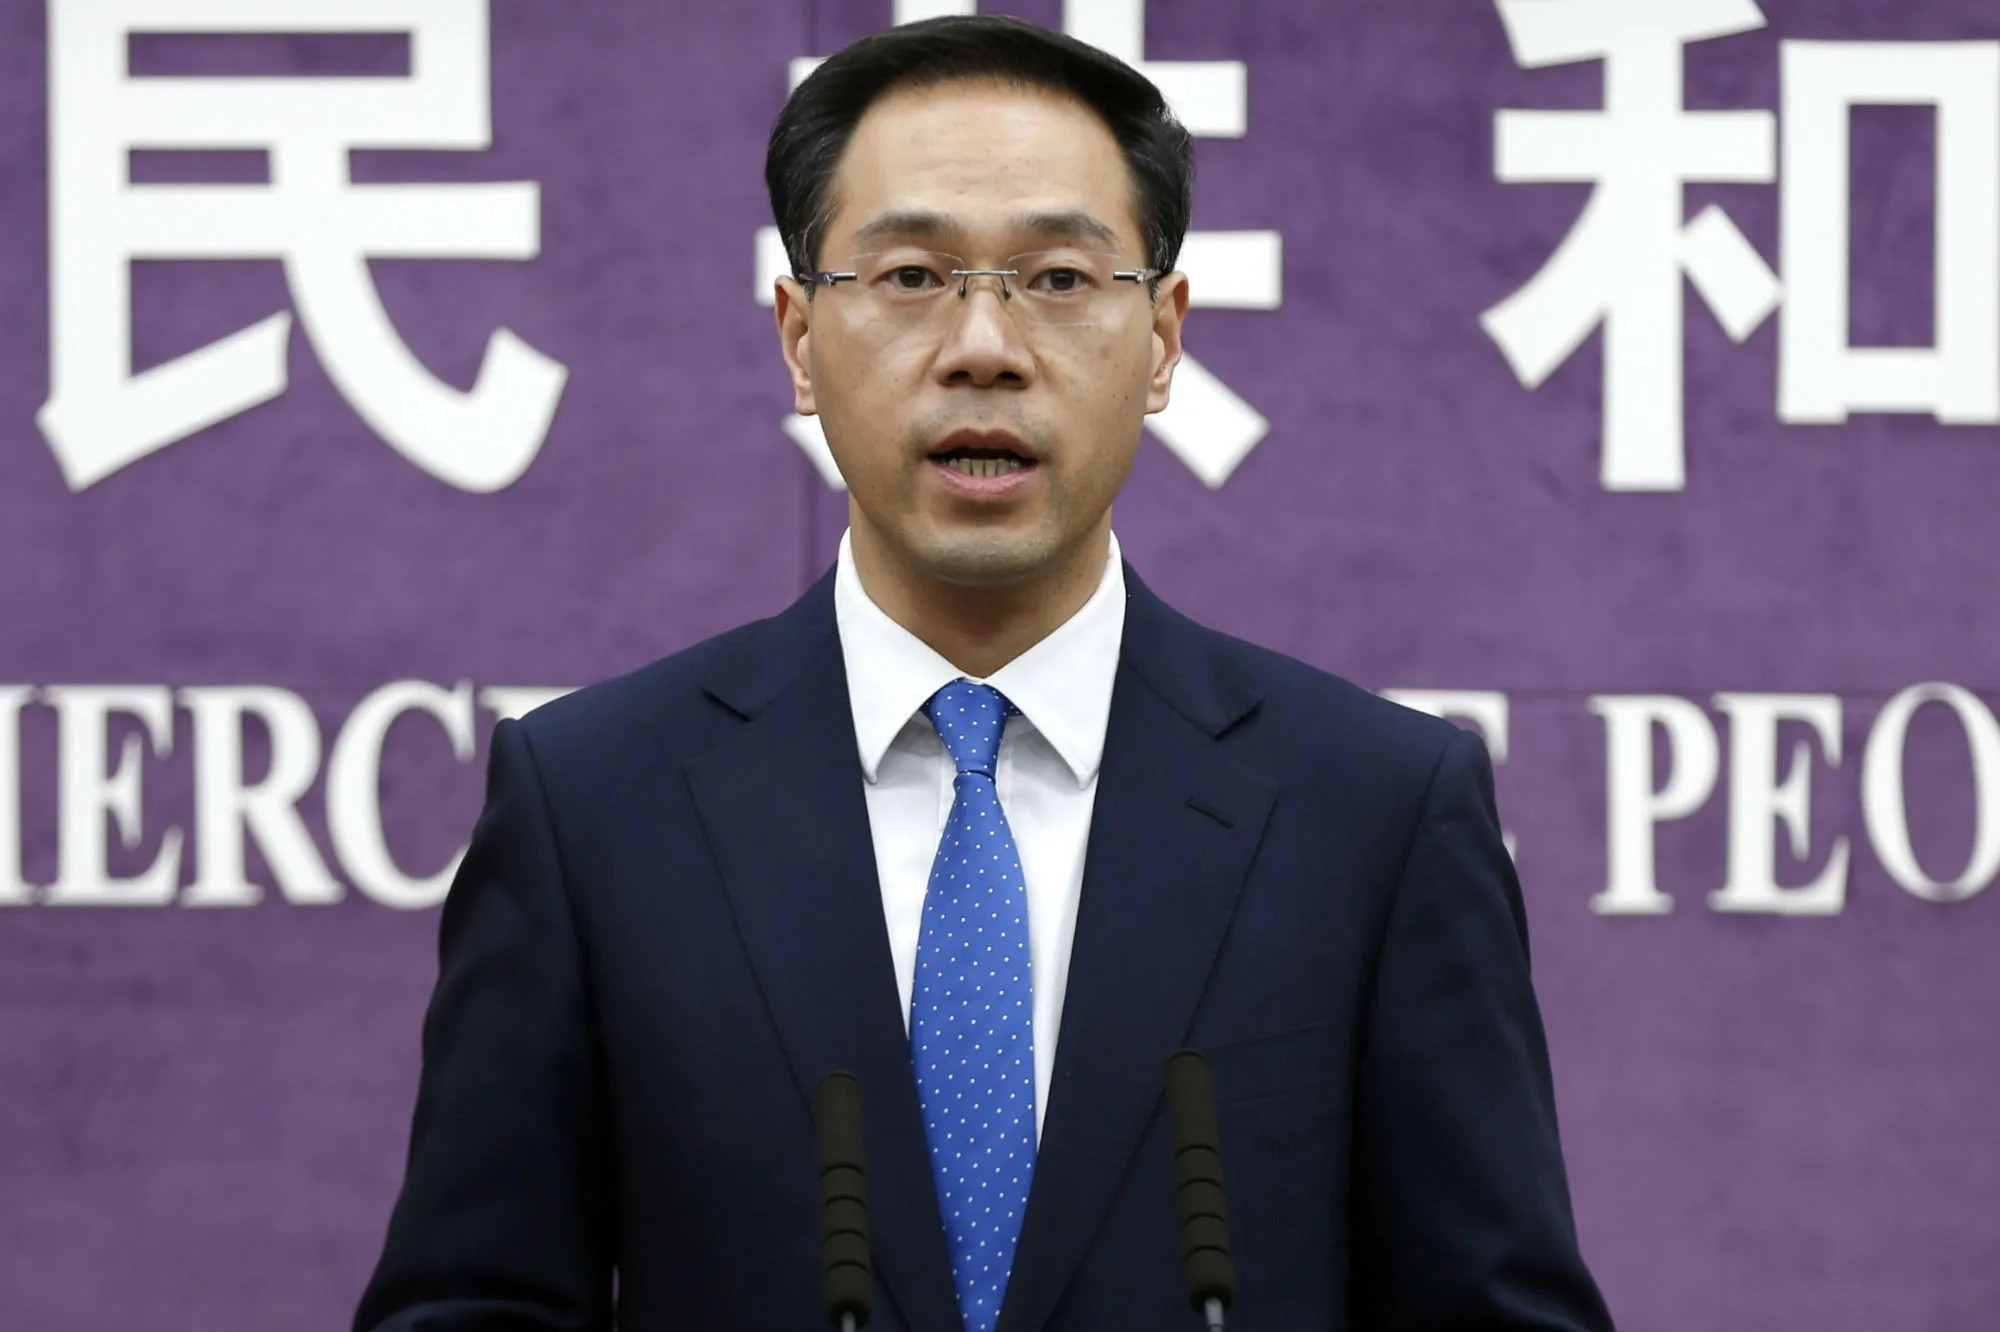 Chinese Ministry of Commerce’s spokesperson, Gao Feng, urged India to “ provide a fair, transport and non-discriminatory environment for Chinese enterprises.